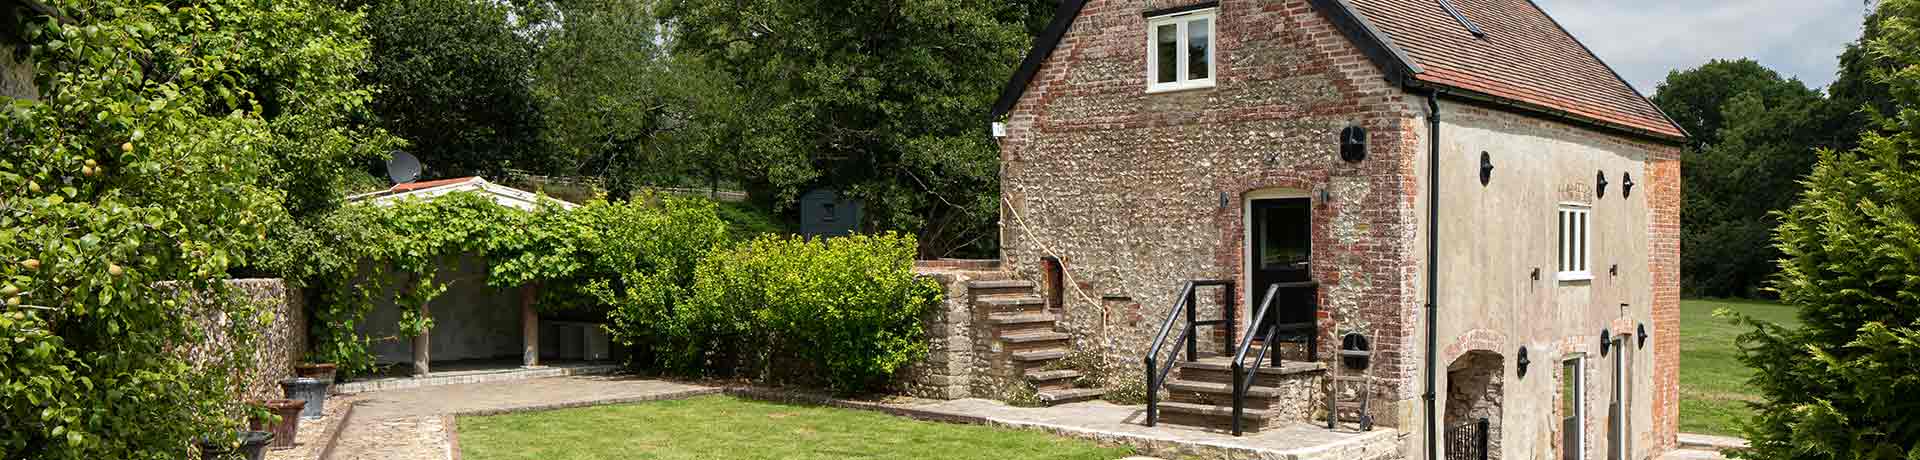 Cottages for 4 people in Yorkshire Dales